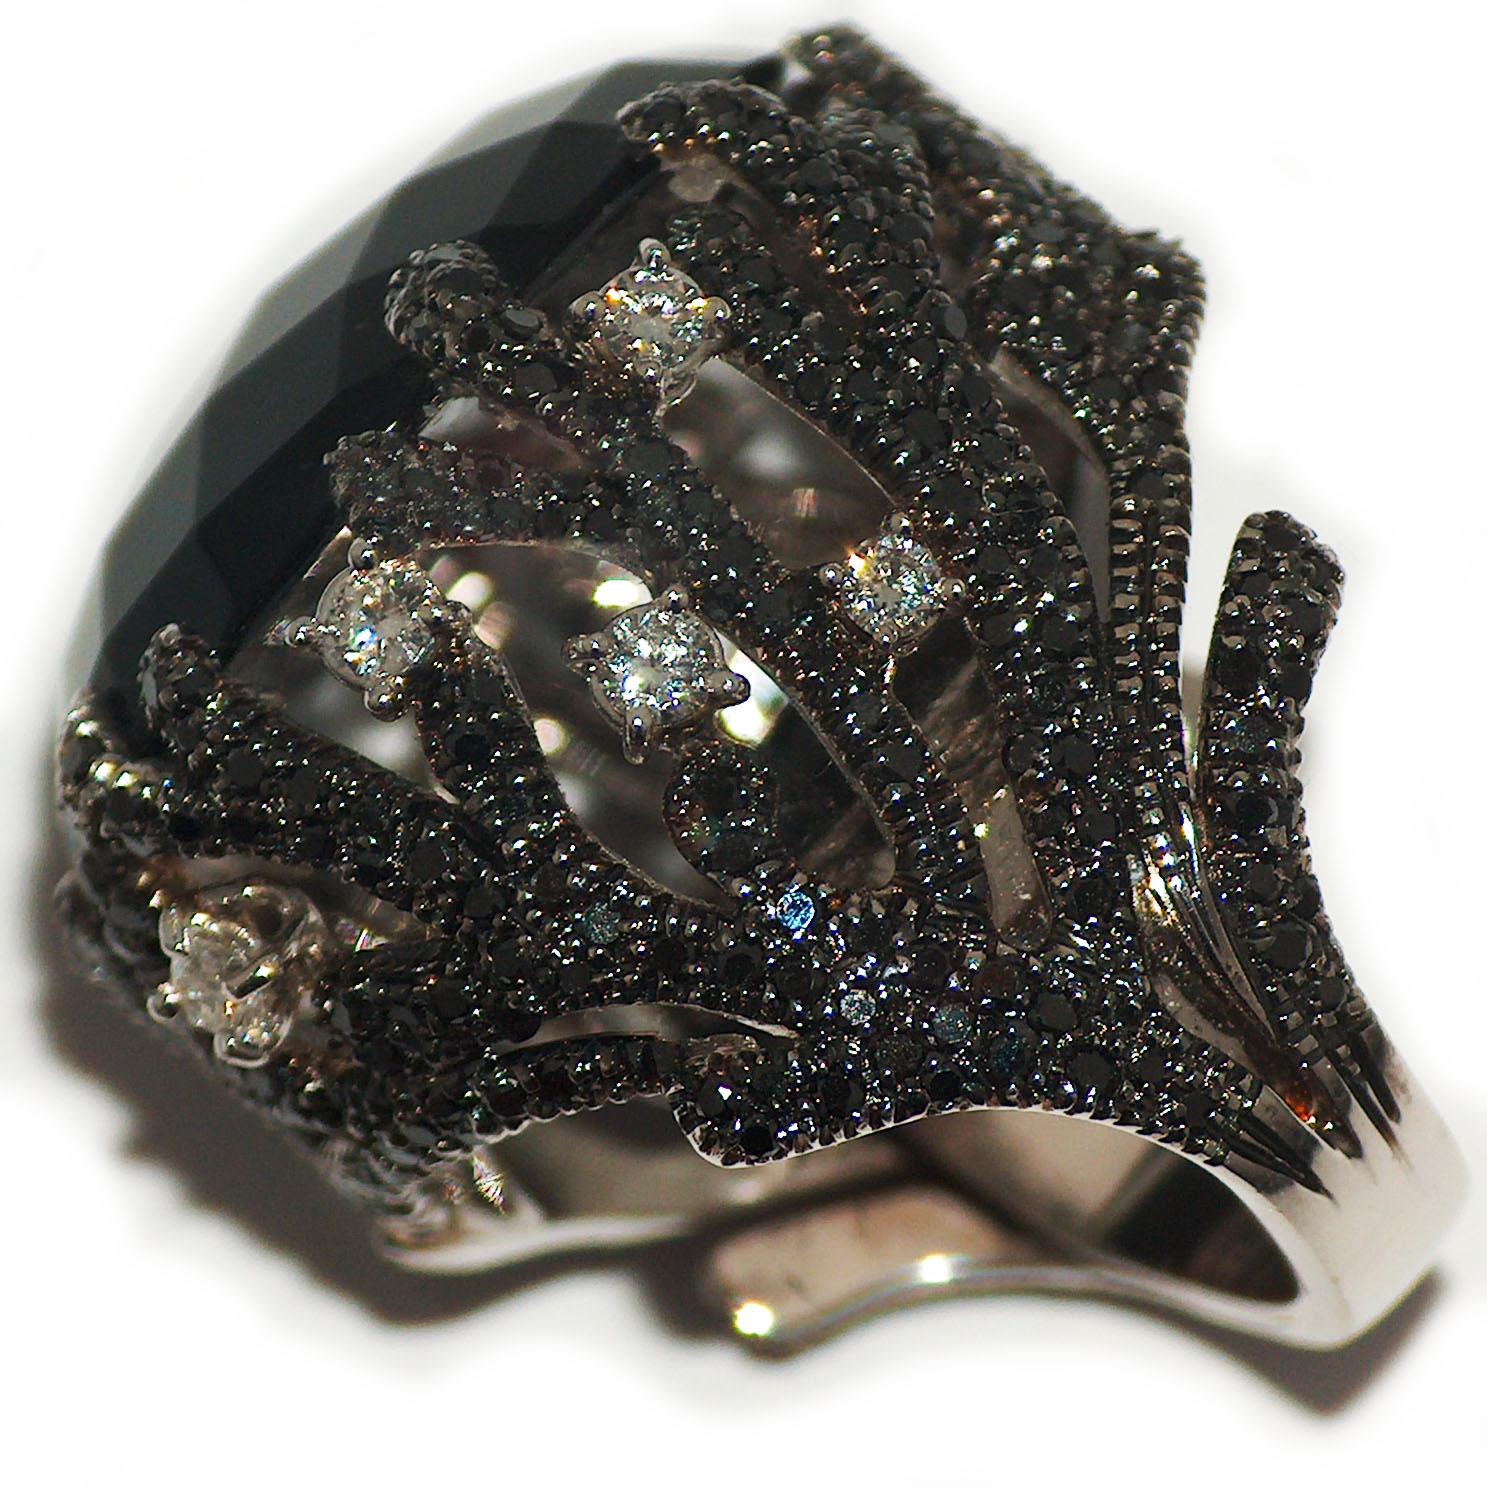 Ring in 18kt white gold which sets White Diamonds for ct. 0,74, Black Diamonds for ct. 3,10 and Onyx for ct. 19,00

Unique piece, designed and handcrafted in Italy, by visionary goldsmith Paolo Piovan. 

Quintessentially chic, this black and white